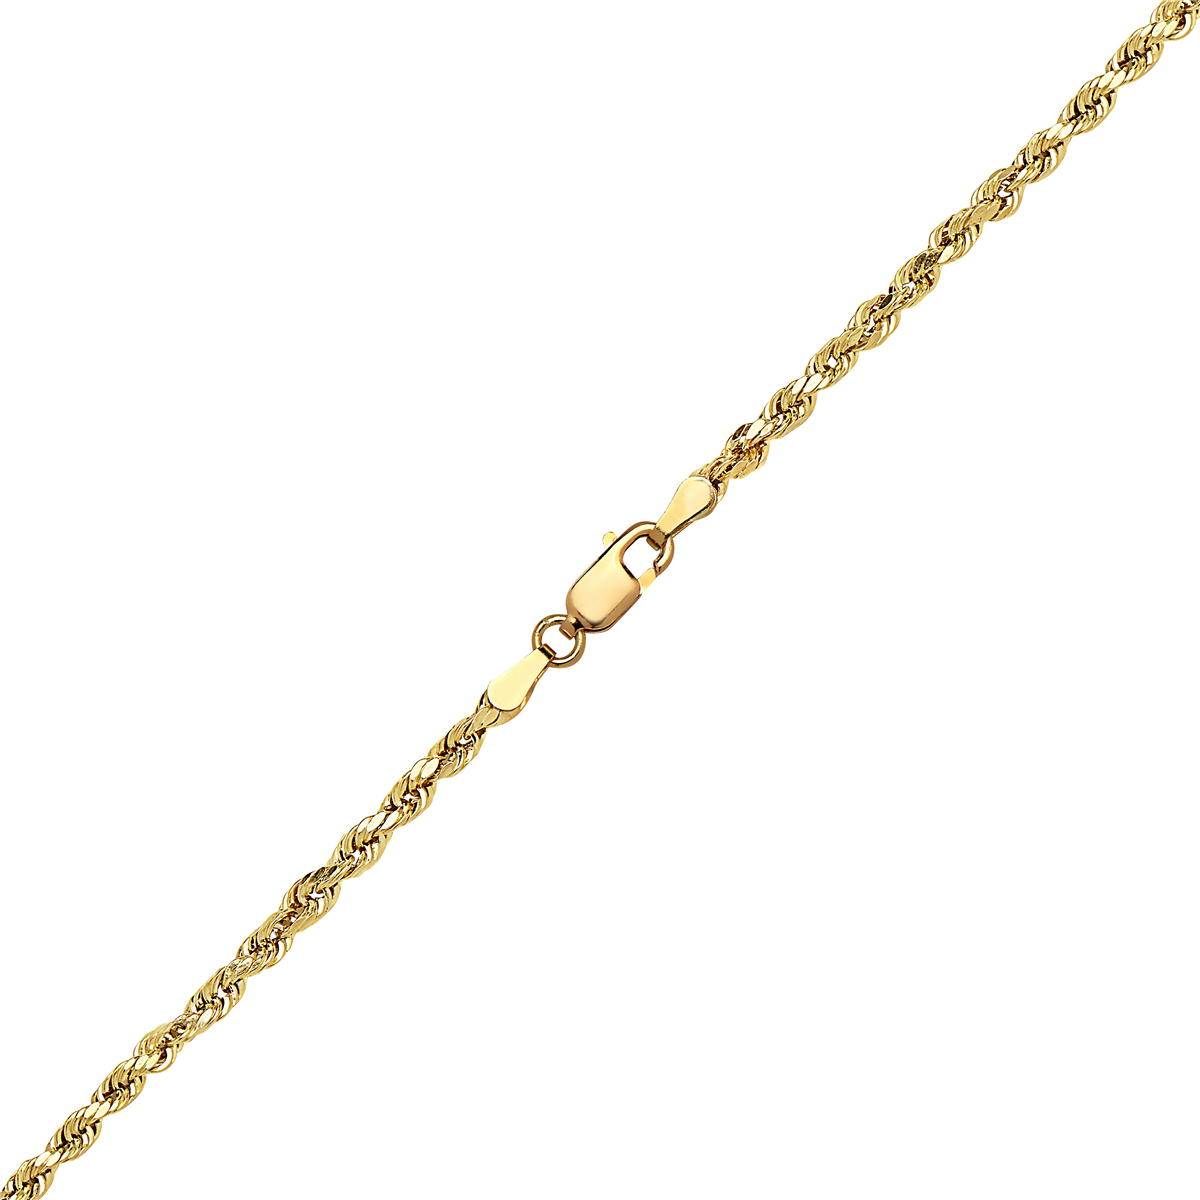 14K Yellow Gold 3mm Rope Chain, 16" - image 5 of 6